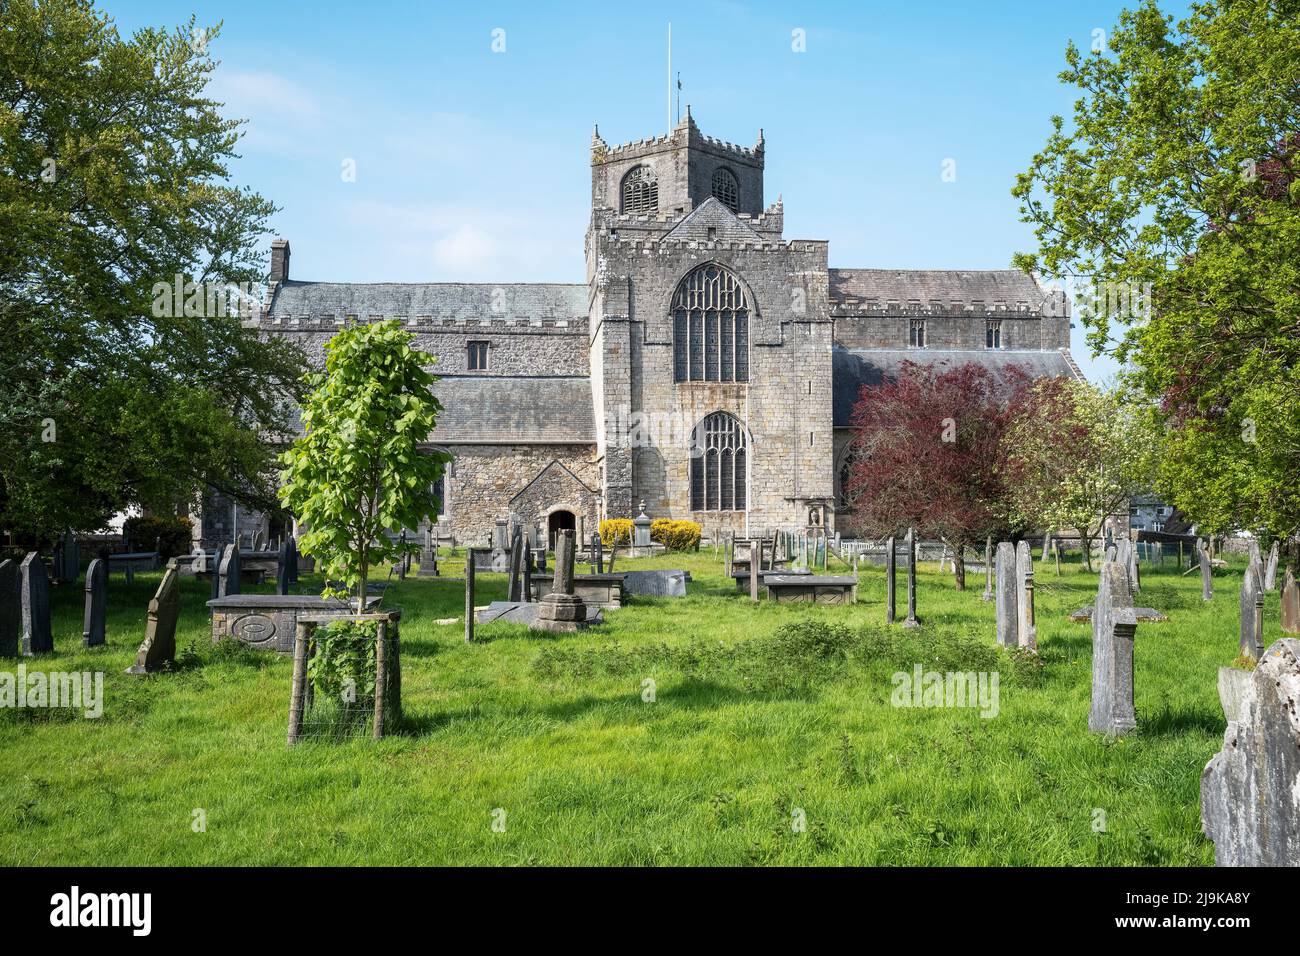 The imposing Parish church of St Mary the Virgin and St Michael (Cartmel Priory) in the centre of Cartmel village, Cumbria, UK Stock Photo